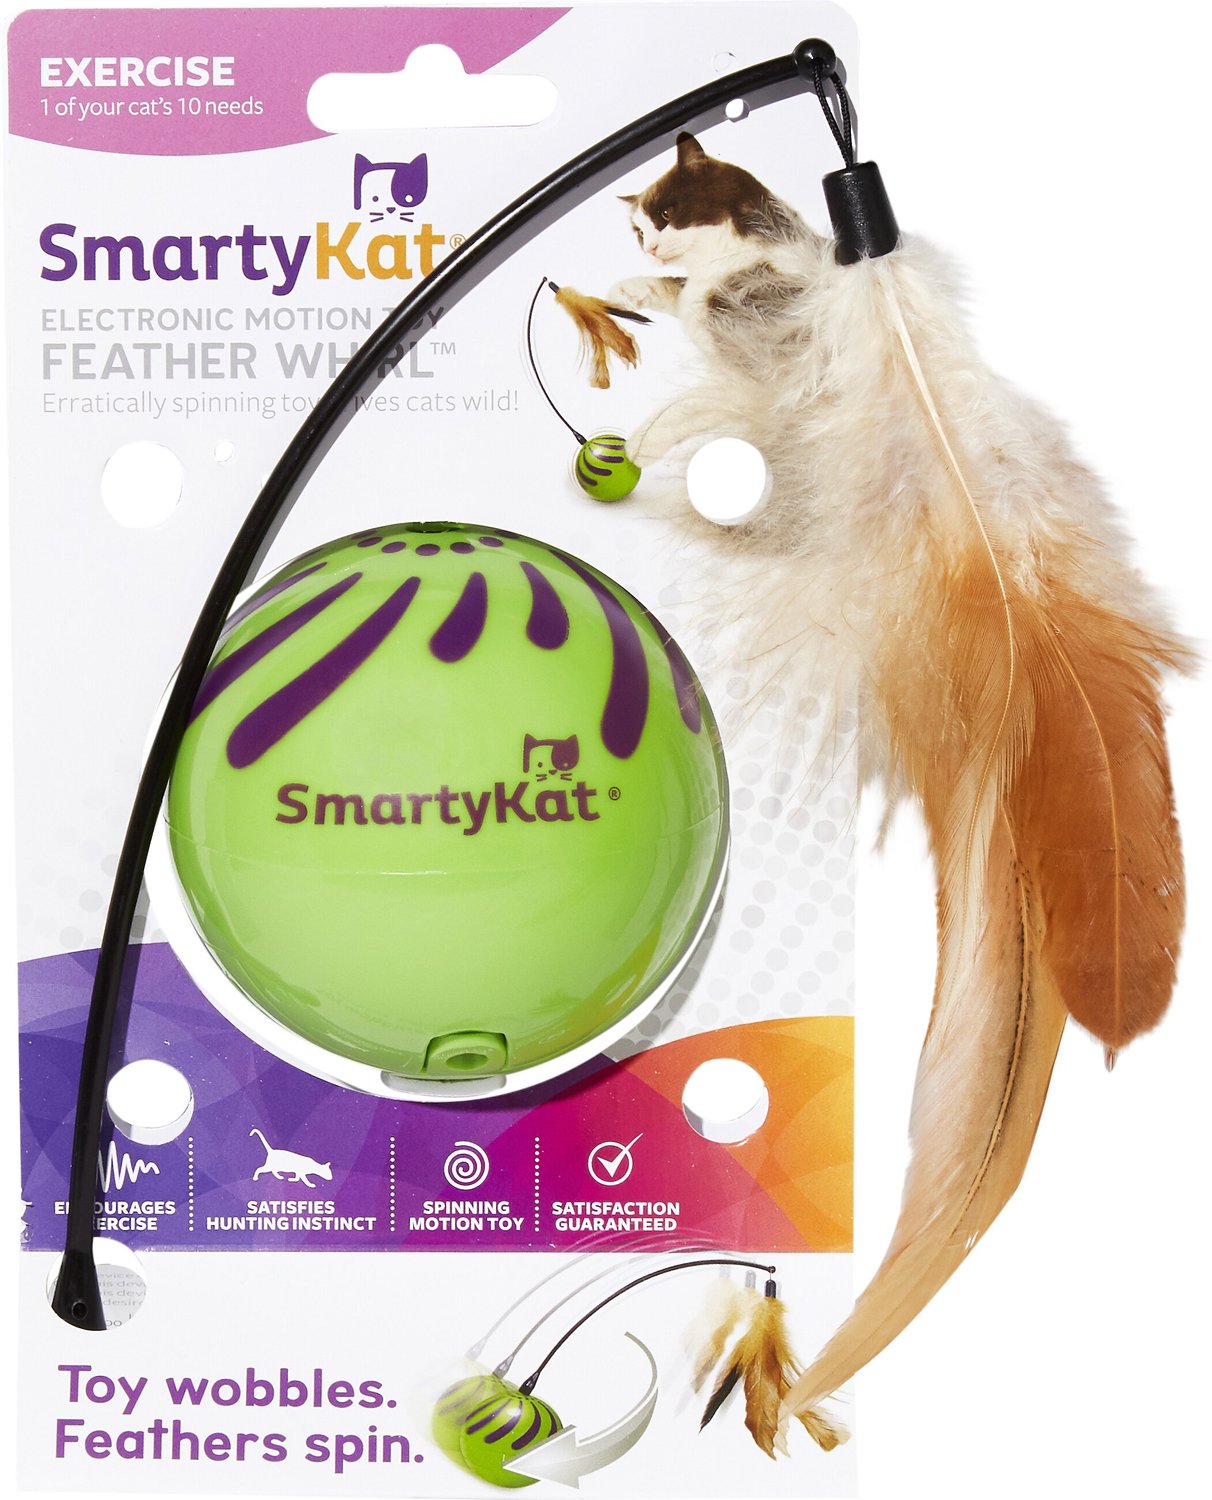 smarty cat feather whirl